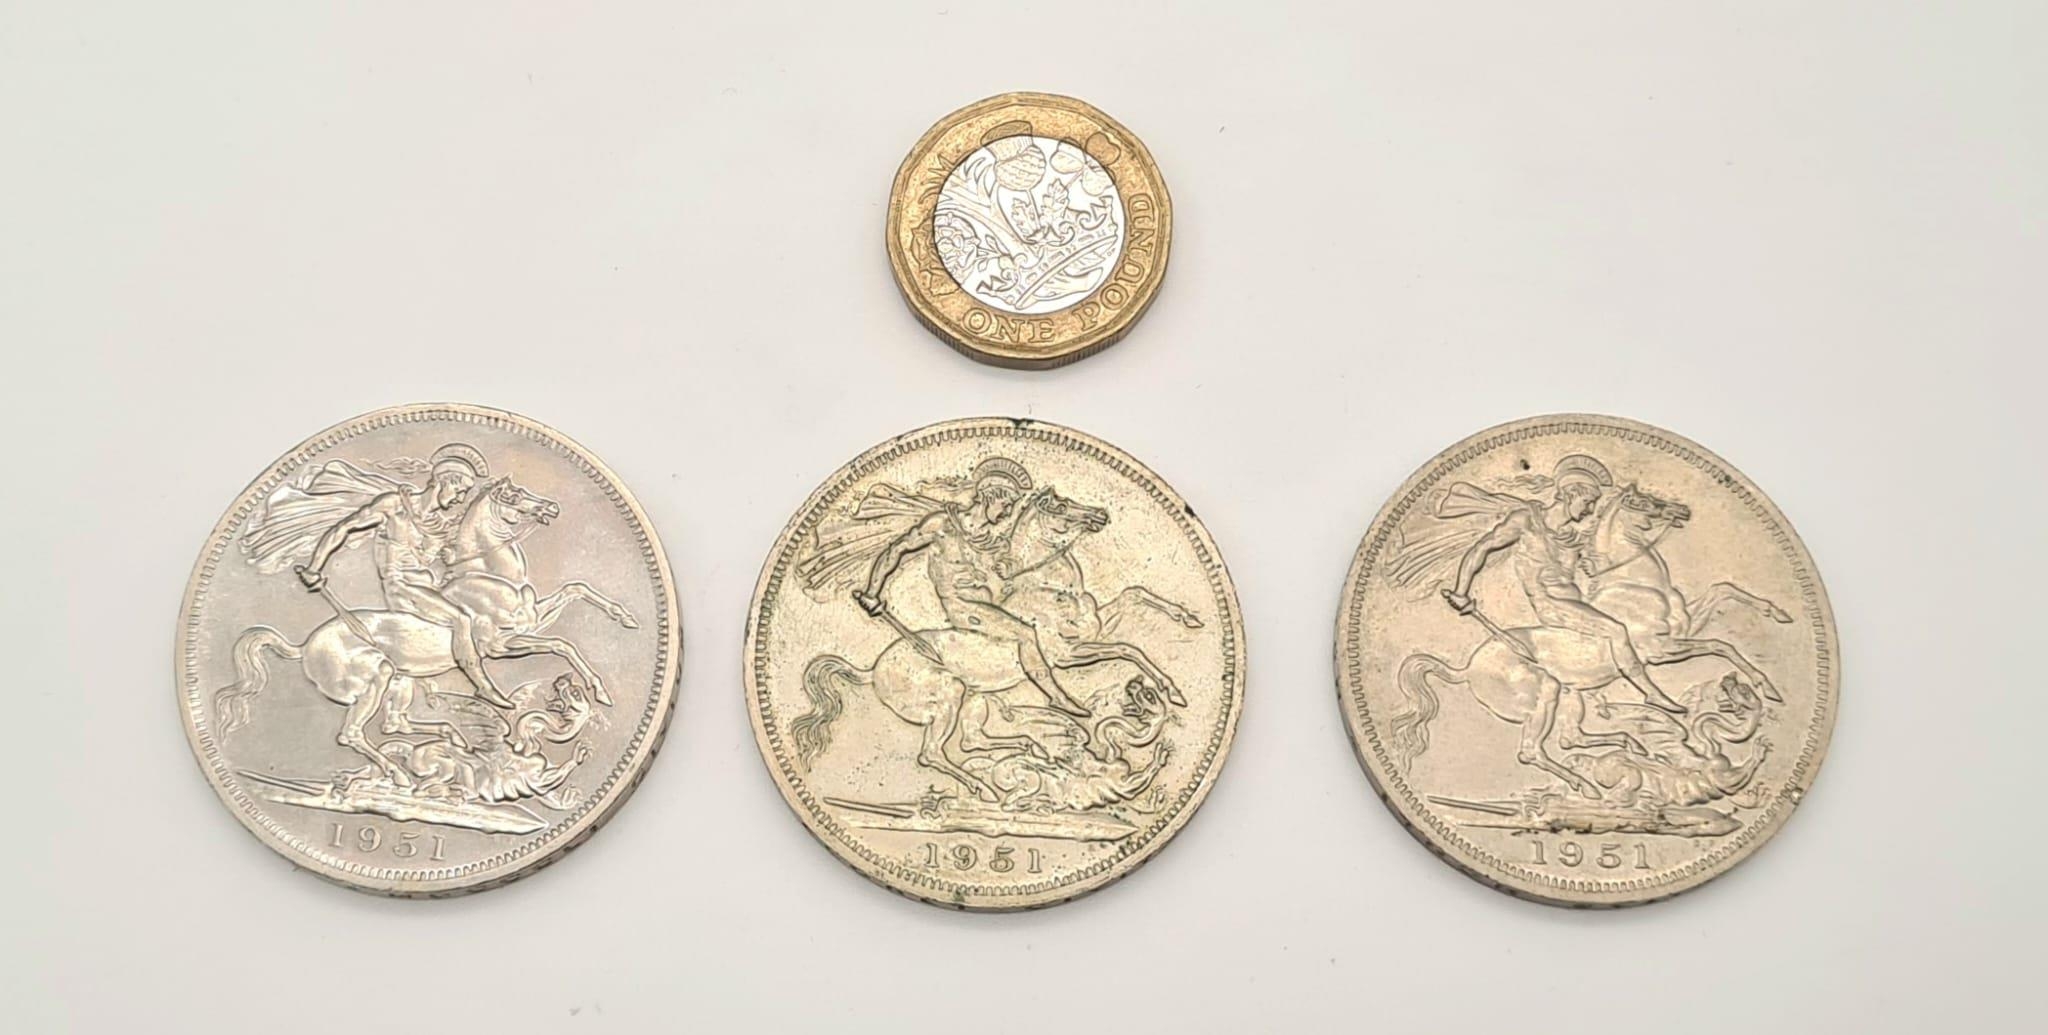 Three Festival of Britain 1951 George VI Crowns. Two in original boxes. Please see photos for - Image 6 of 6